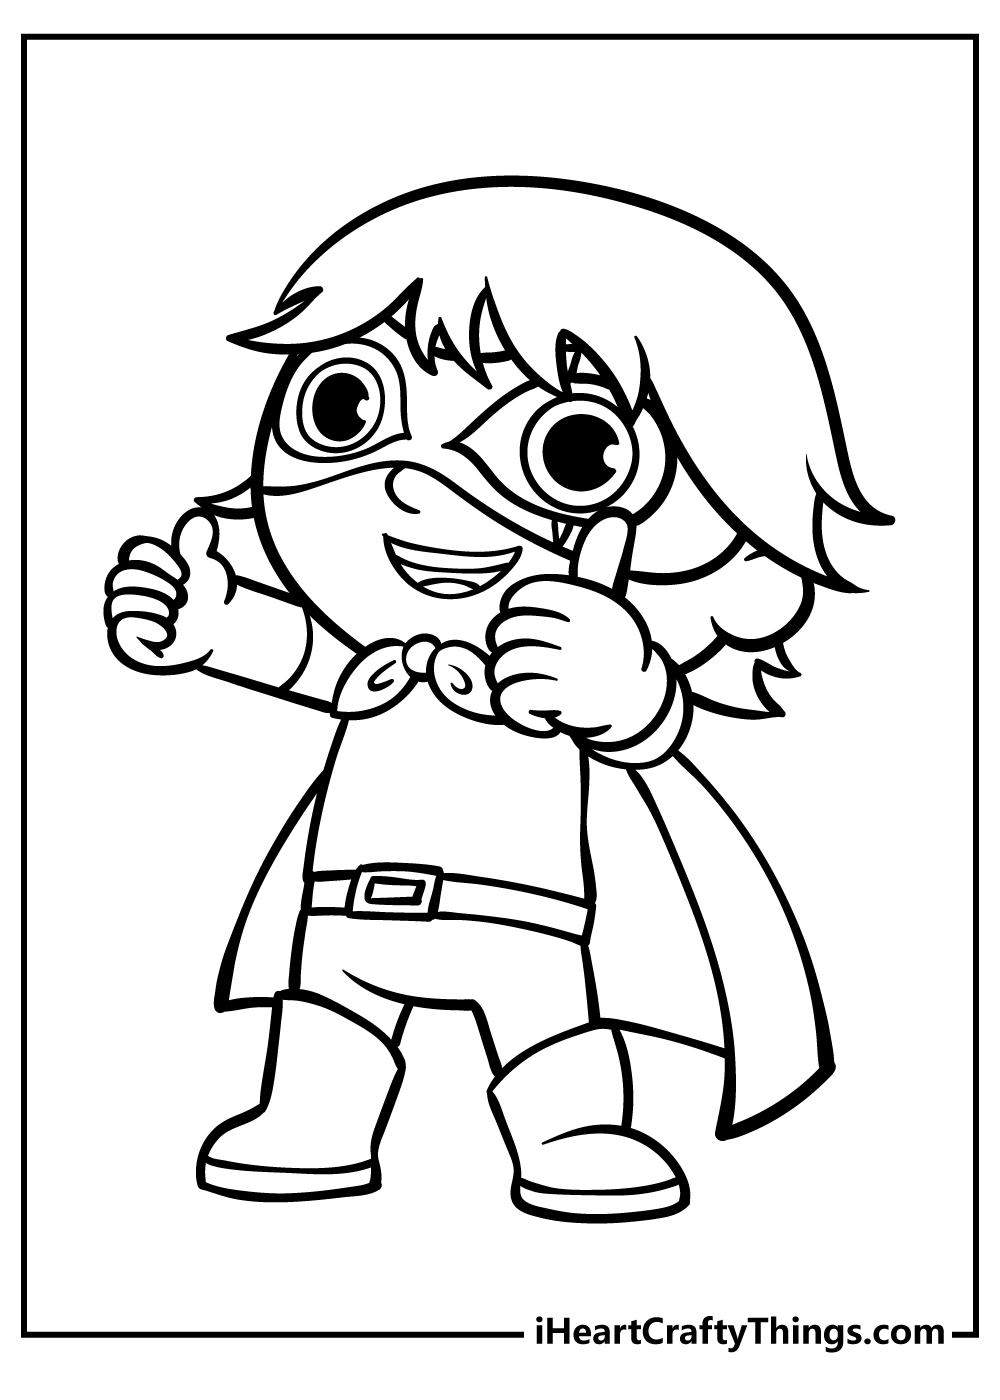 Ryan coloring pages free printables